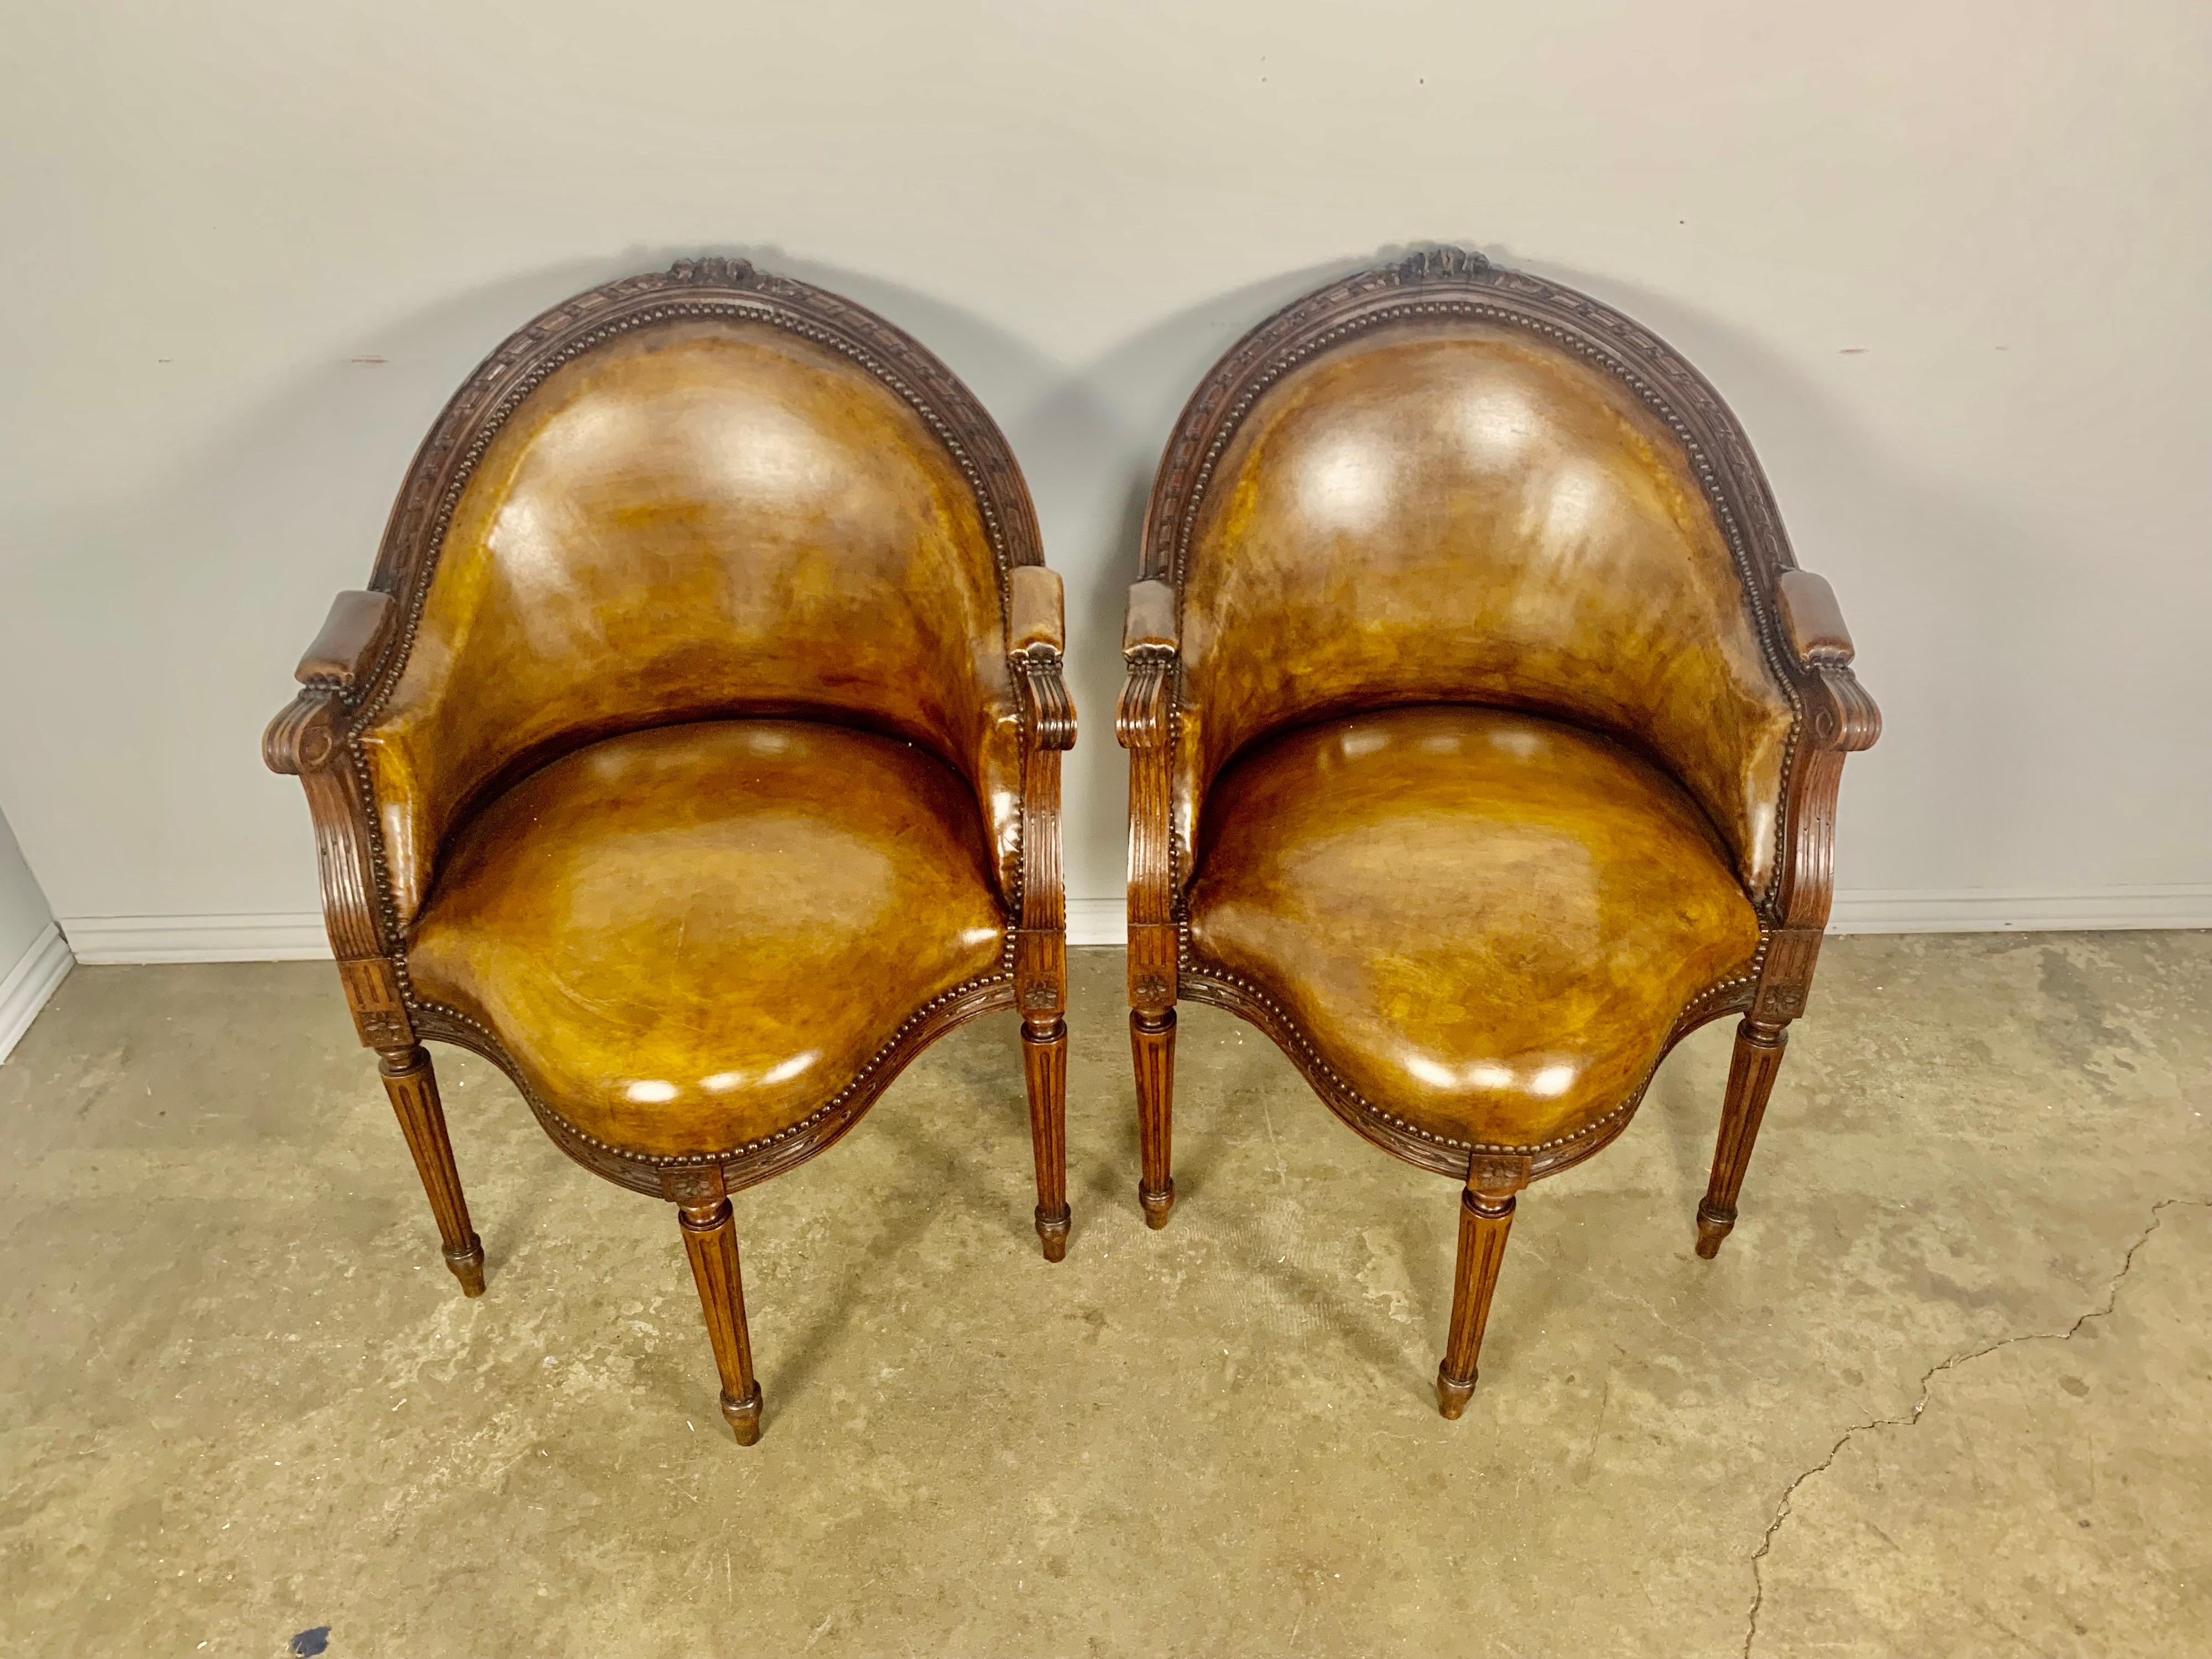 Pair of unique French Louis XVI style armchairs upholstered in a warm tobacco colored leather with nailhead trim detail. The chairs stand on four straight fluted legs. A. great pair of occasional chairs for almost any decor.